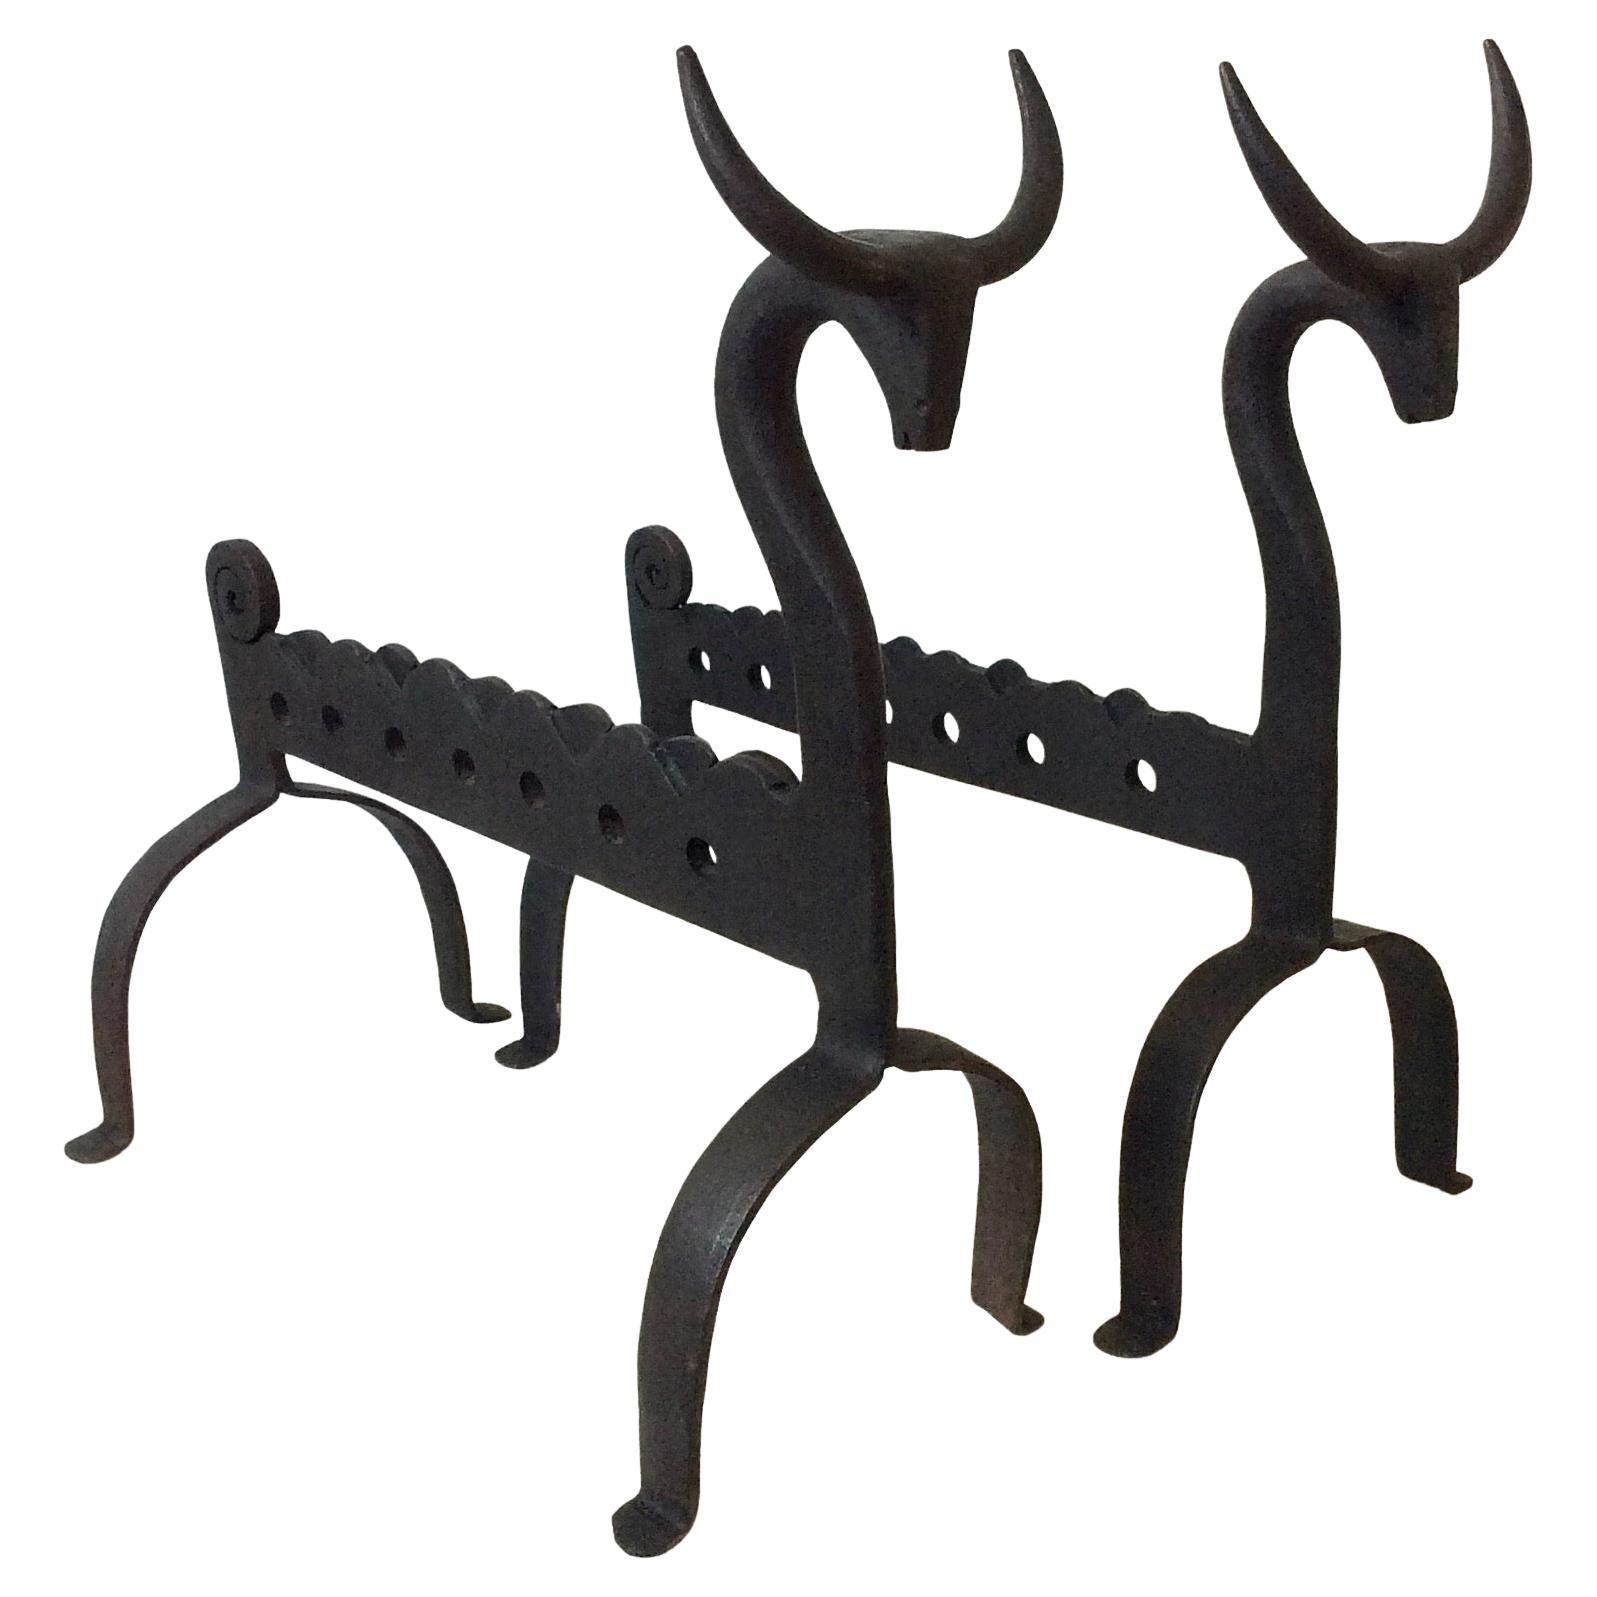 Very nice decorative pair of bulls andirons, circa 1950, France.
Blackened wrought iron.
Dimensions: 34 cm H, 32 cm D, 17 cm W.
Rare item in good origninal condition.
All purchases are covered by our Buyer Protection Guarantee.
This item can be